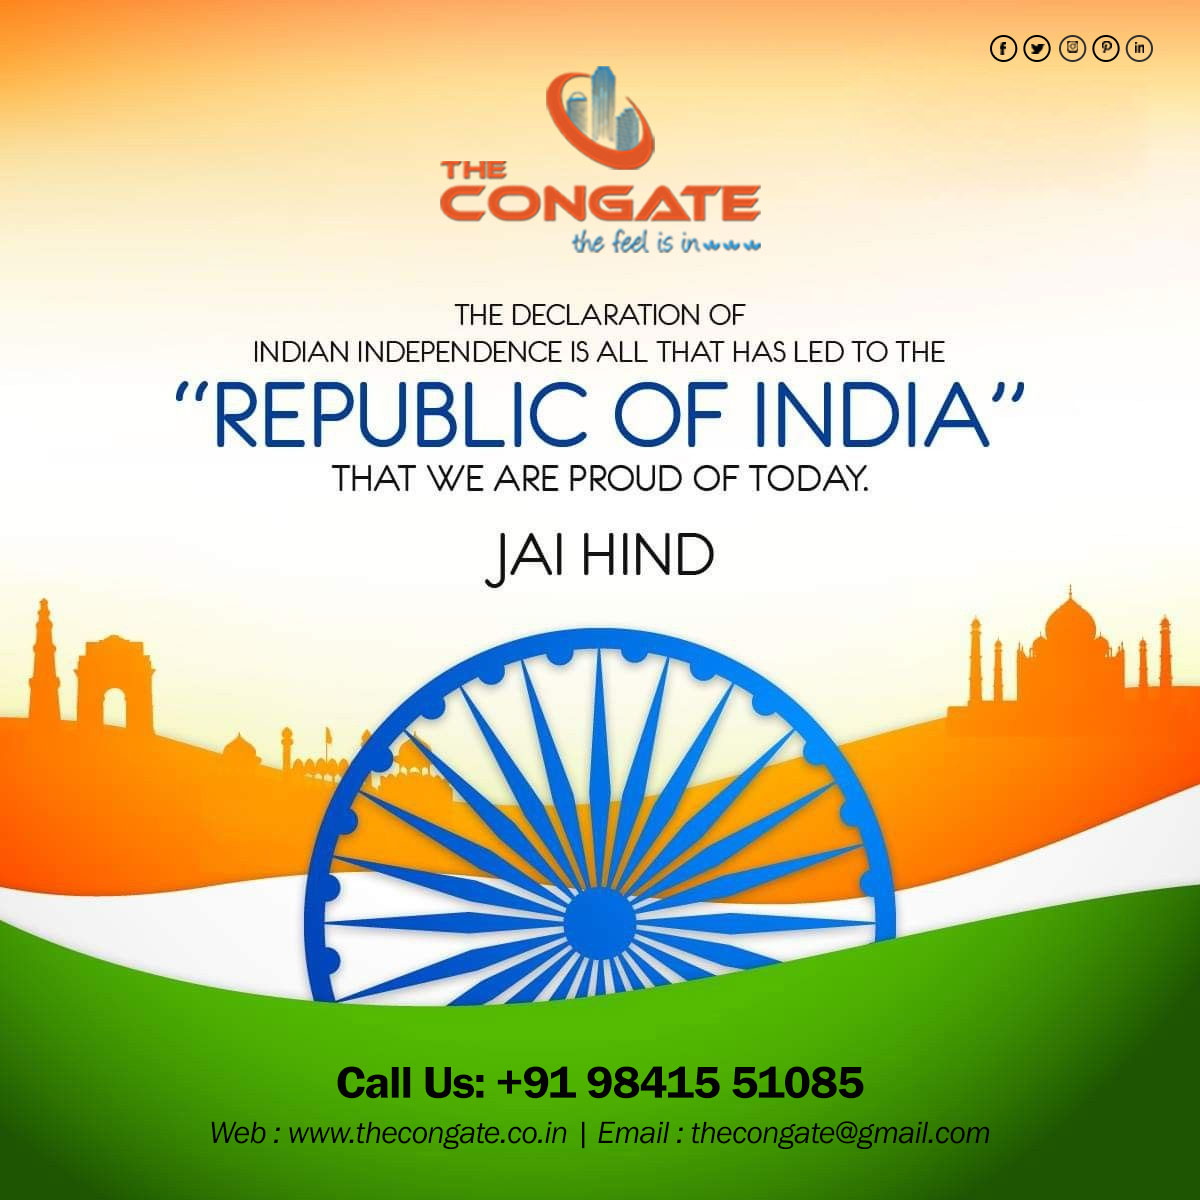 Happy Republic Day!! #Republic #RepublicDay #HappyRepublicDay #National #India #congate #thecongate